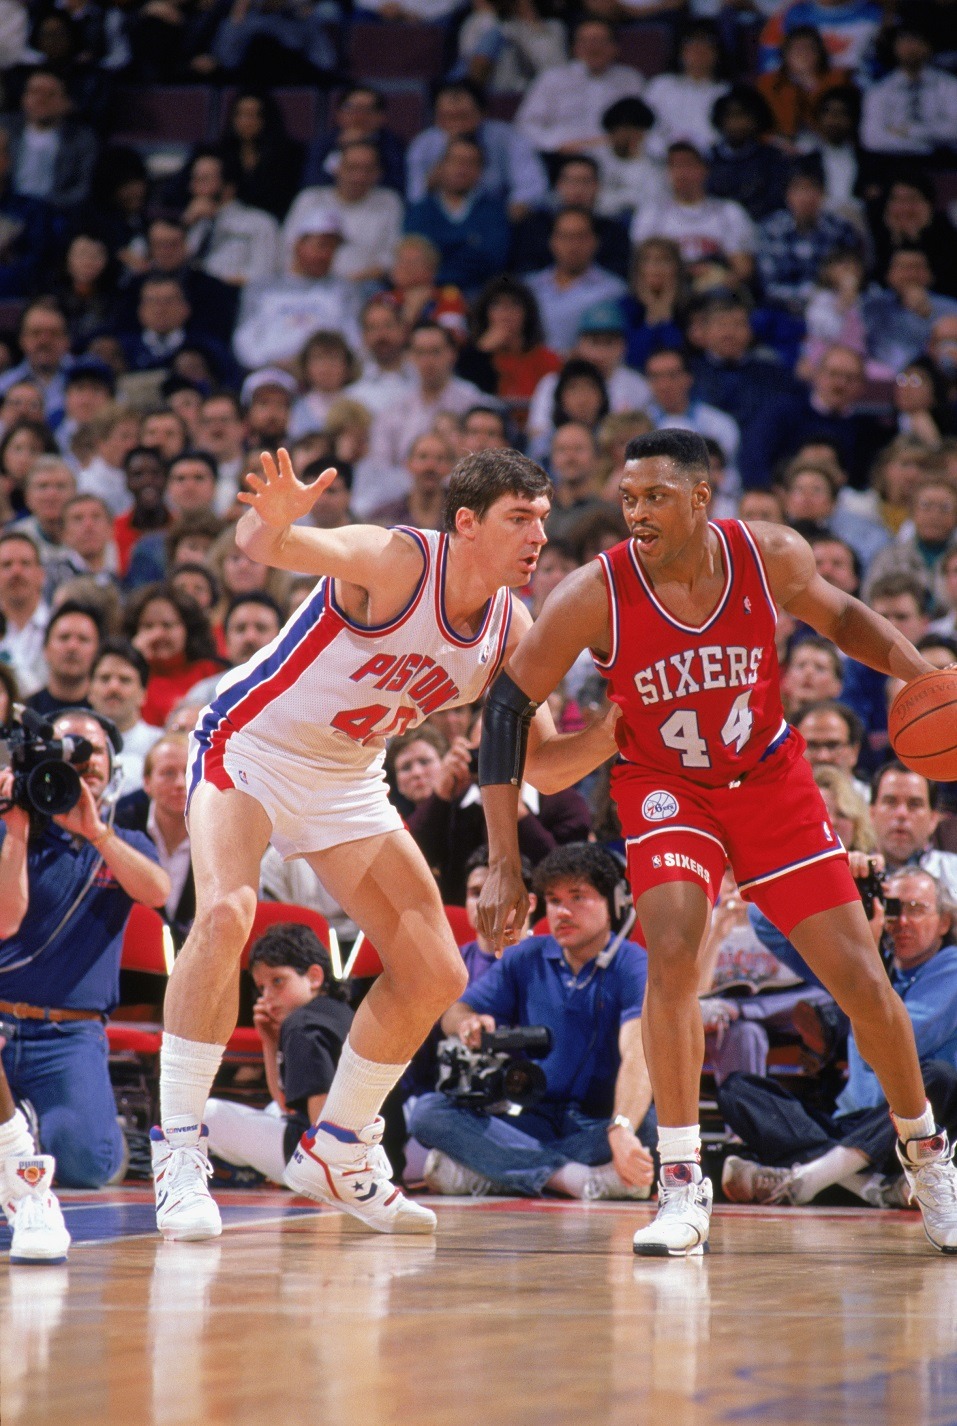 Rick Mahorn of the Philadelphia 76ers is defended by Bill Laimbeer of the Detroit Pistons.